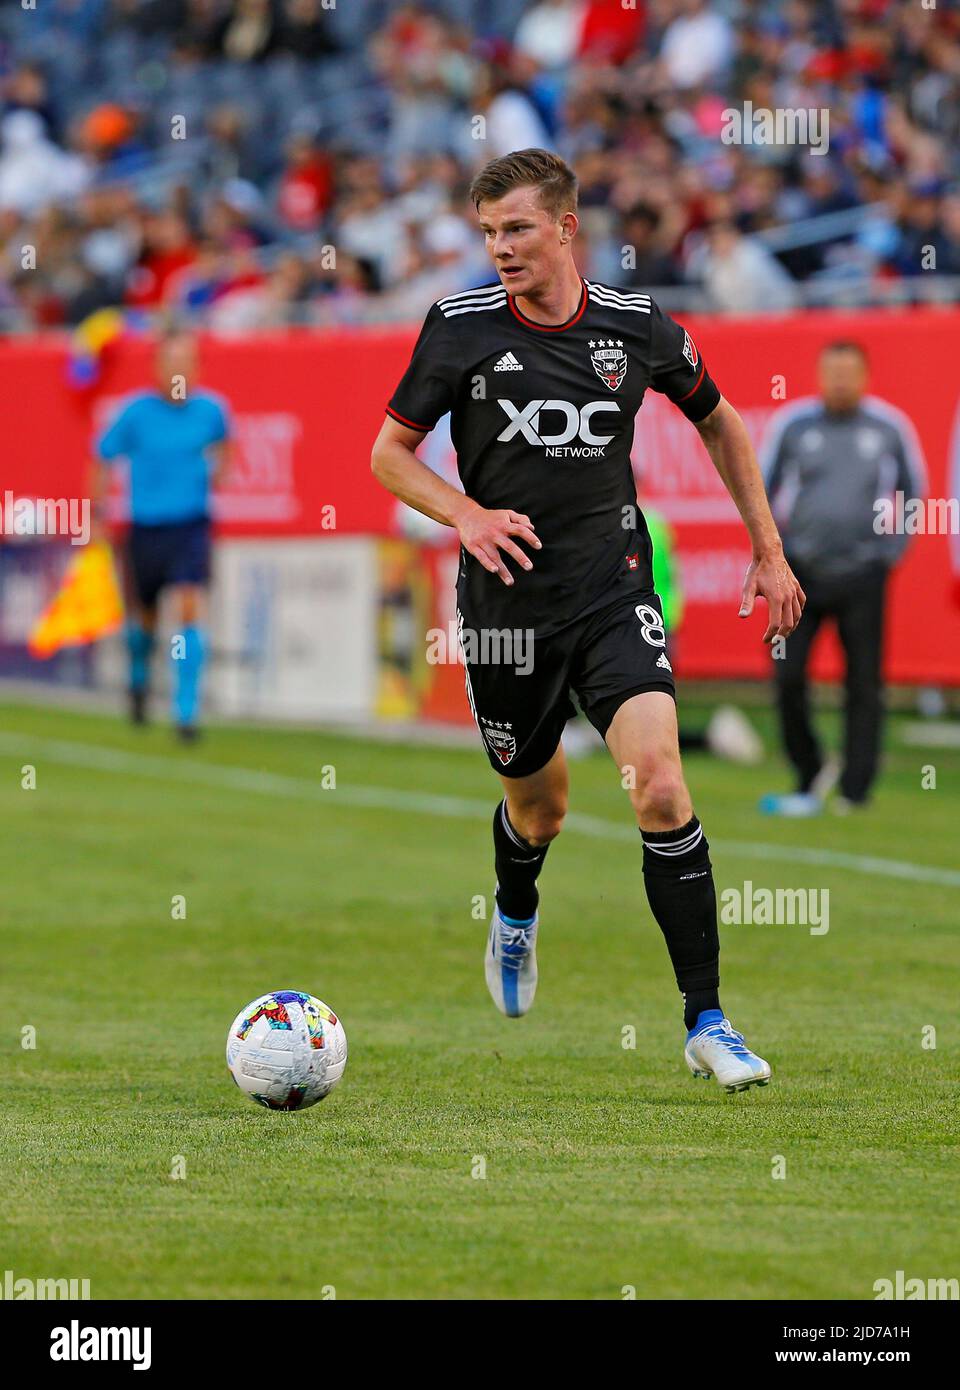 Chicago, USA, 18 June 2022.  MLS DC United's Chris Durkin handles the ball against the Chicago Fire FC during a match at Soldier Field in Chicago, IL, USA. Credit: Tony Gadomski / All Sport Imaging / Alamy Live News Stock Photo